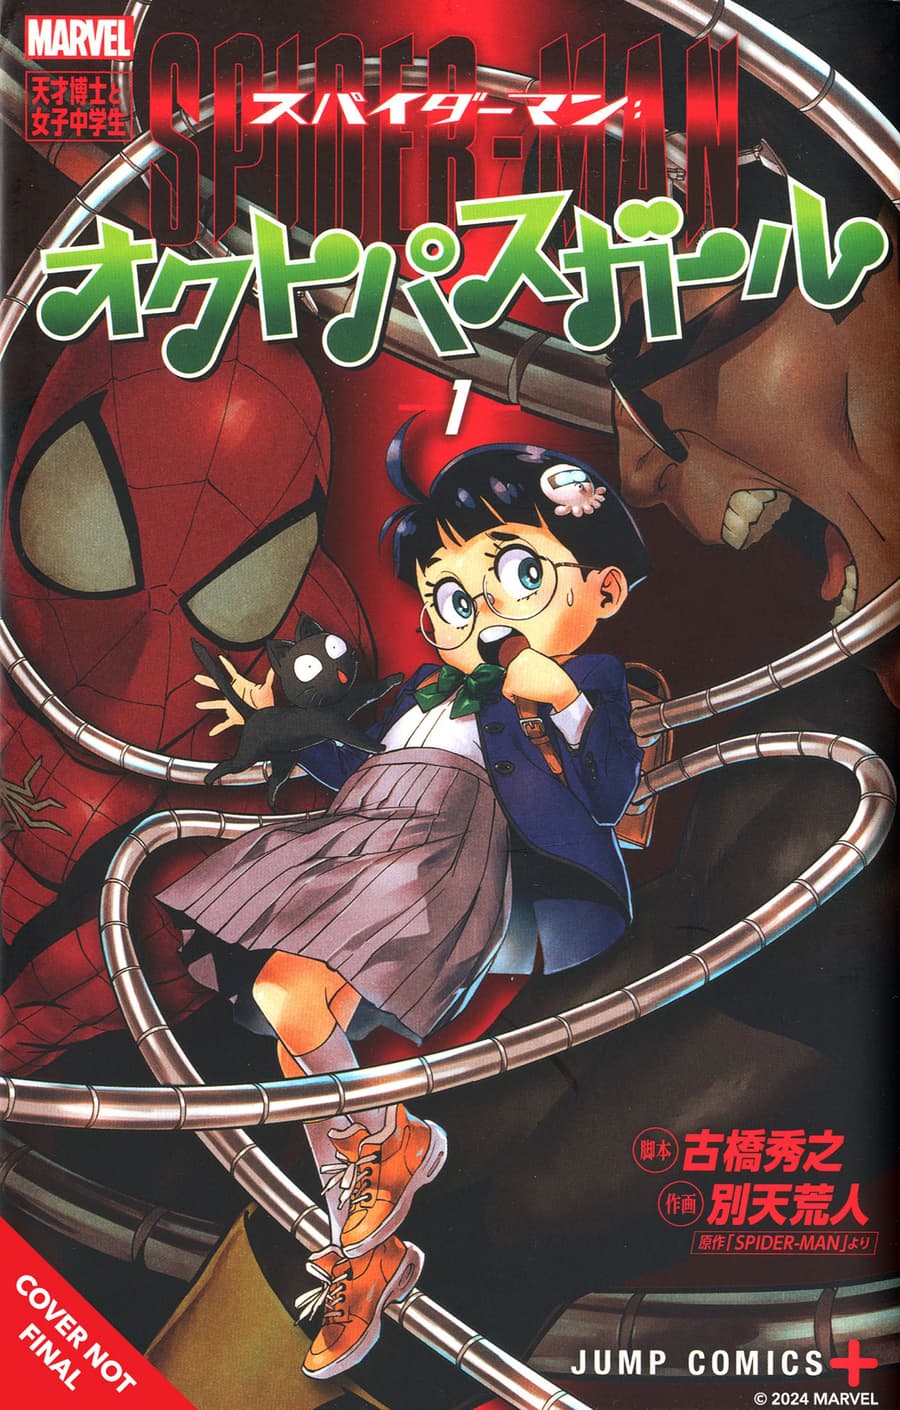 SPIDER-MAN: OCTO-GIRL, VOL. 1 cover by Betten Court